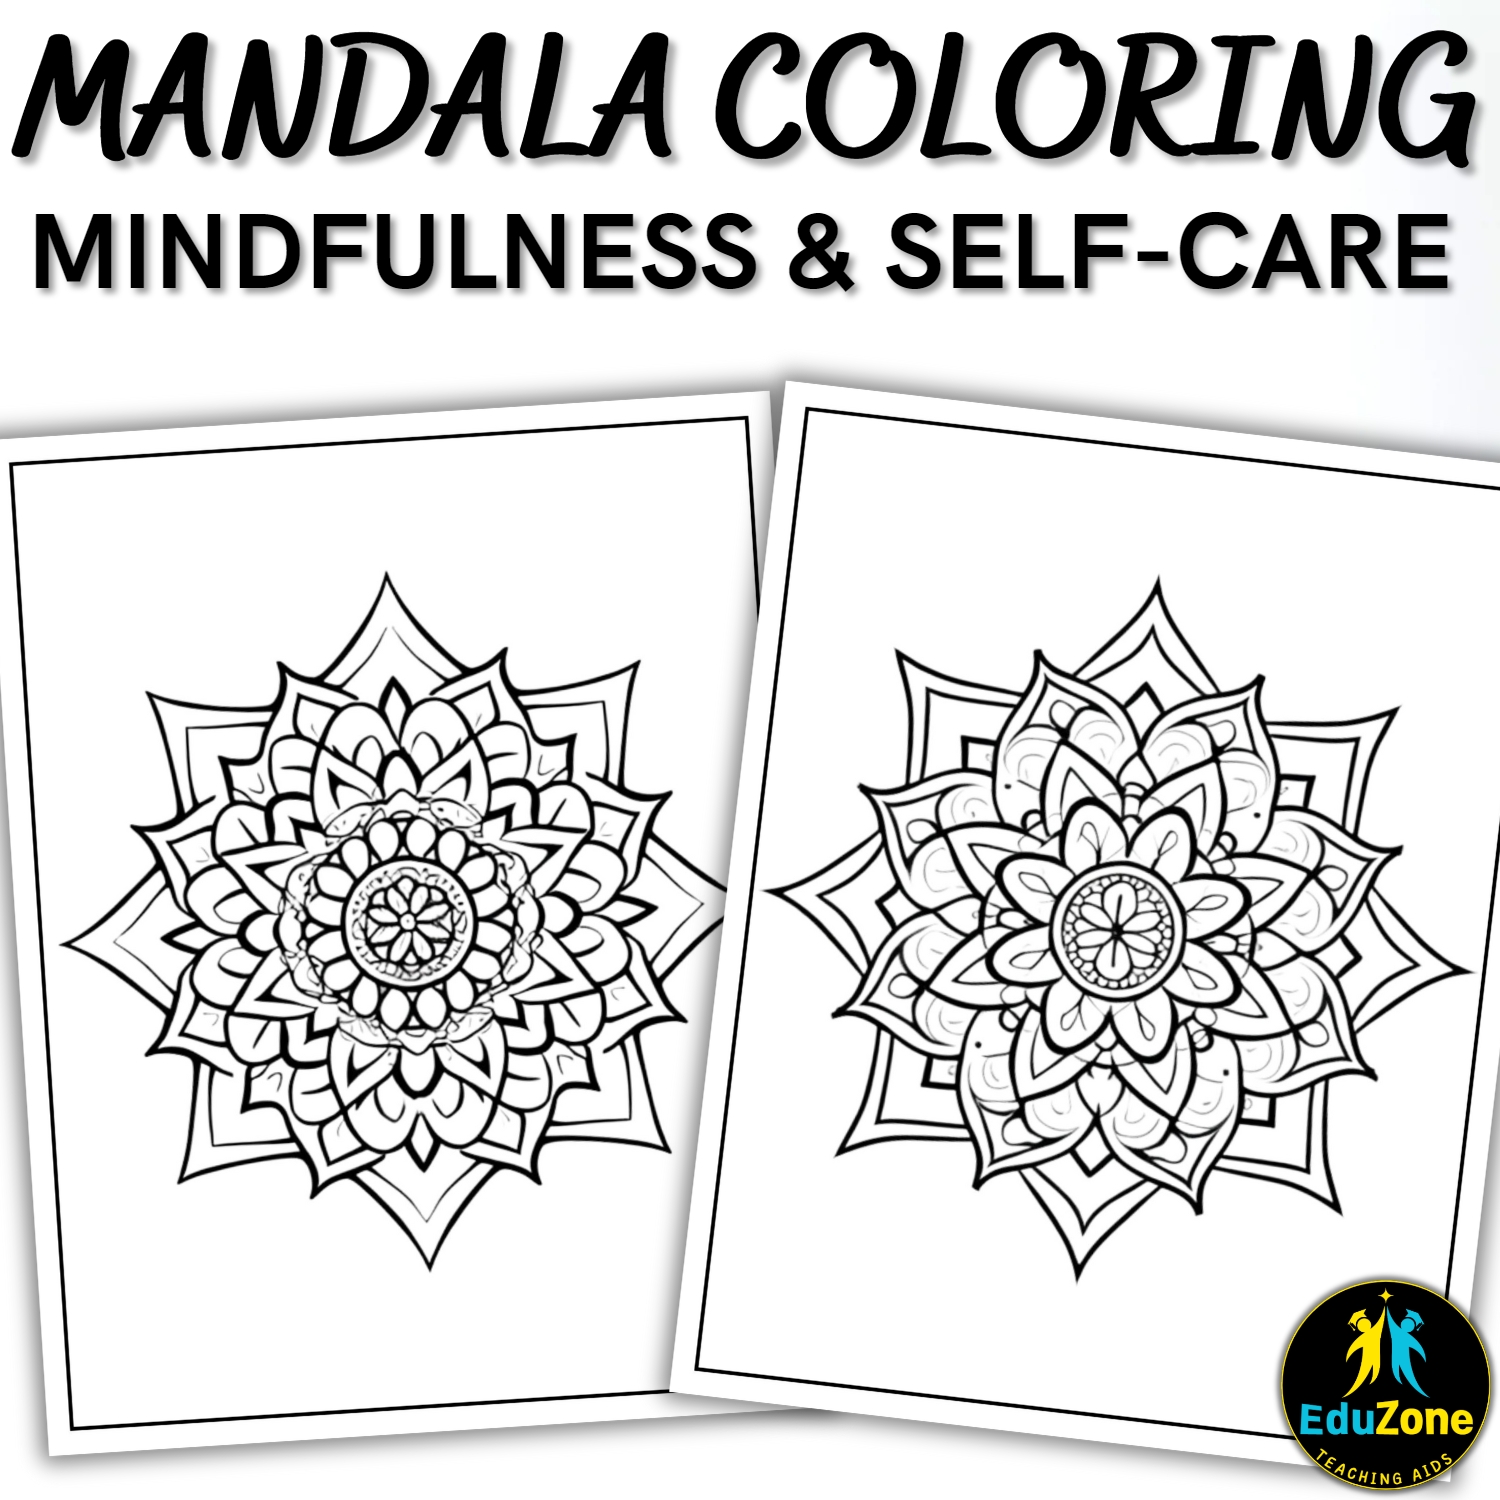 Mandala coloring book printable mandala coloring book for inner peace stress relief mindfulness made by teachers